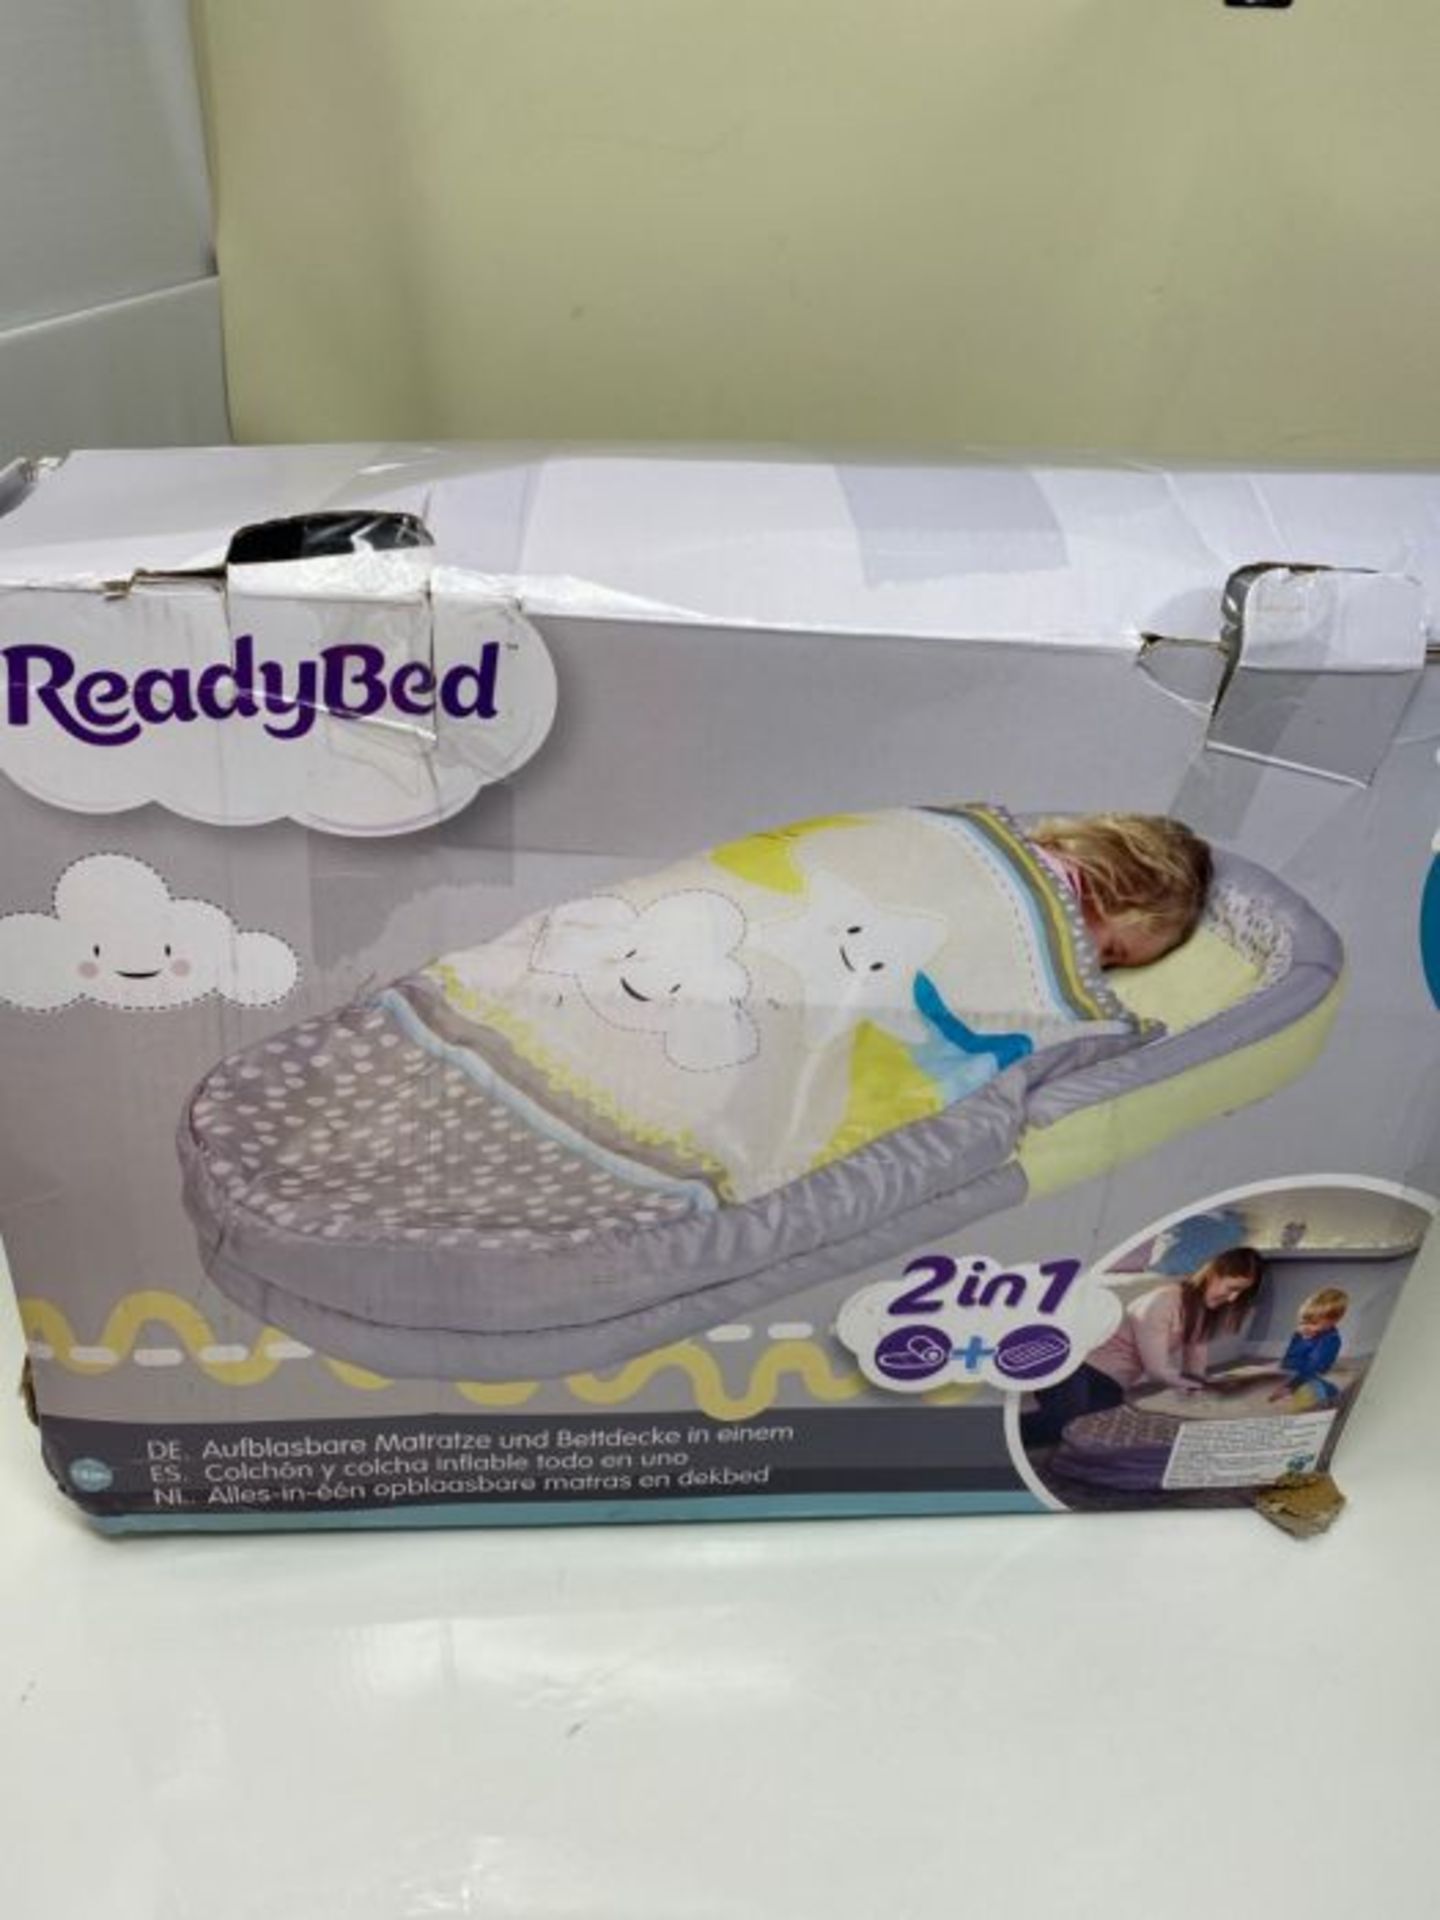 My First ReadyBed - Inflatable Toddler Air Bed and Sleeping Bag in one - Image 2 of 3